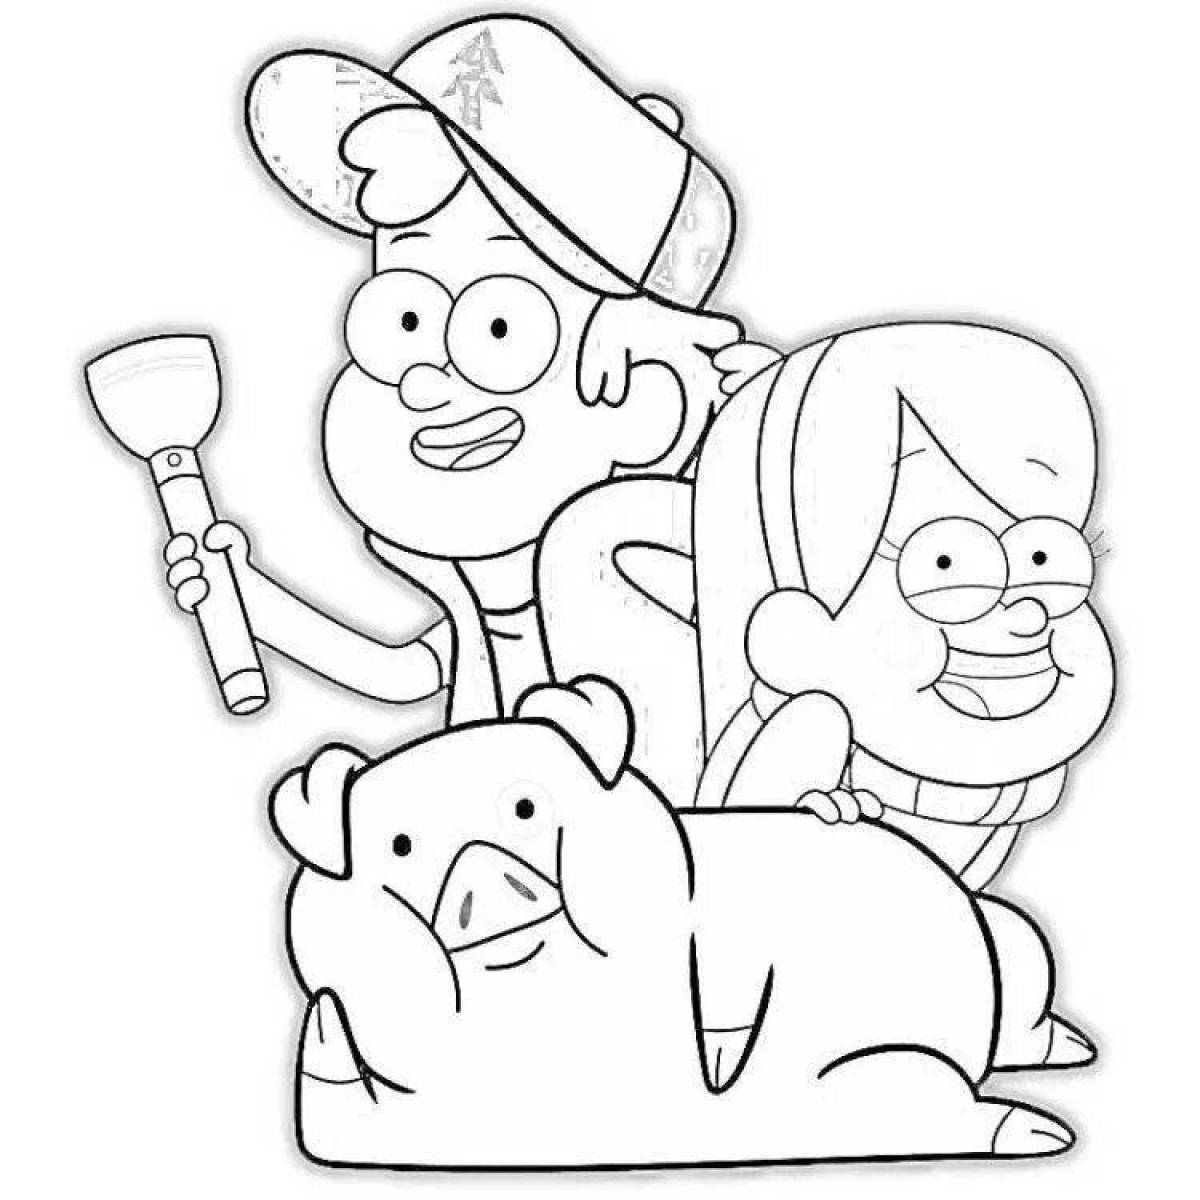 Amazing Gravity Falls Coloring Page